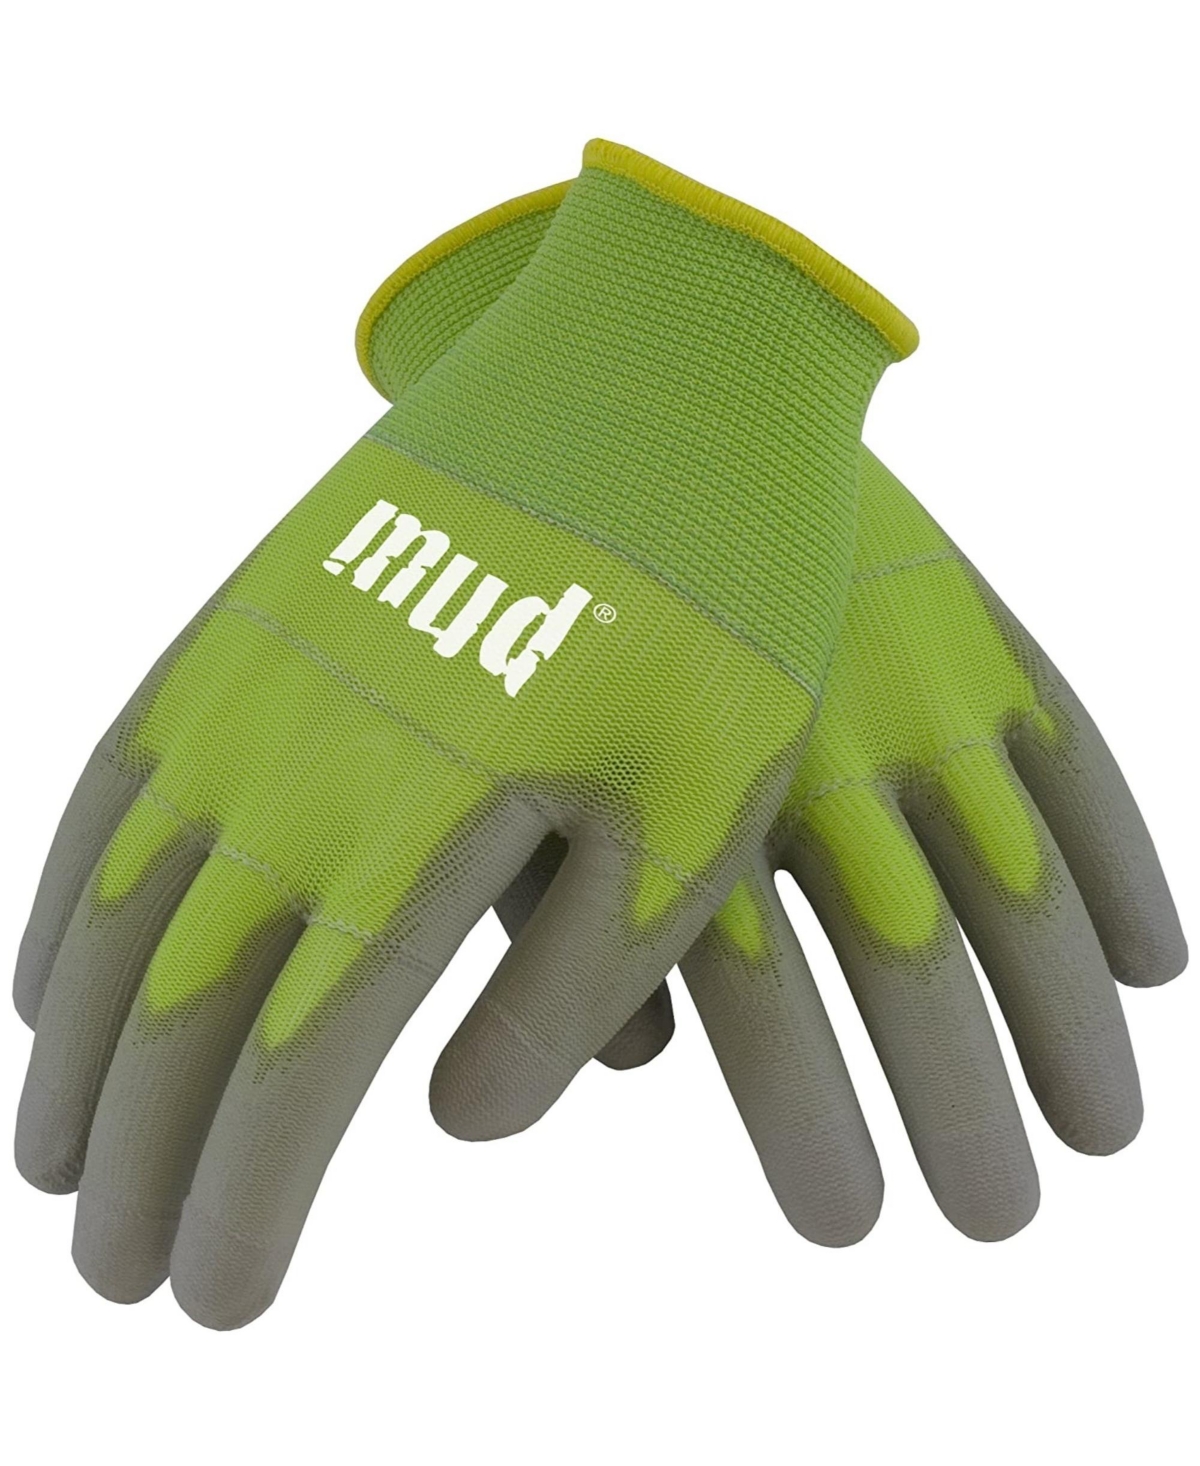 Smart Glove Poly Coated Mud Gloves, Apple, Large - Green